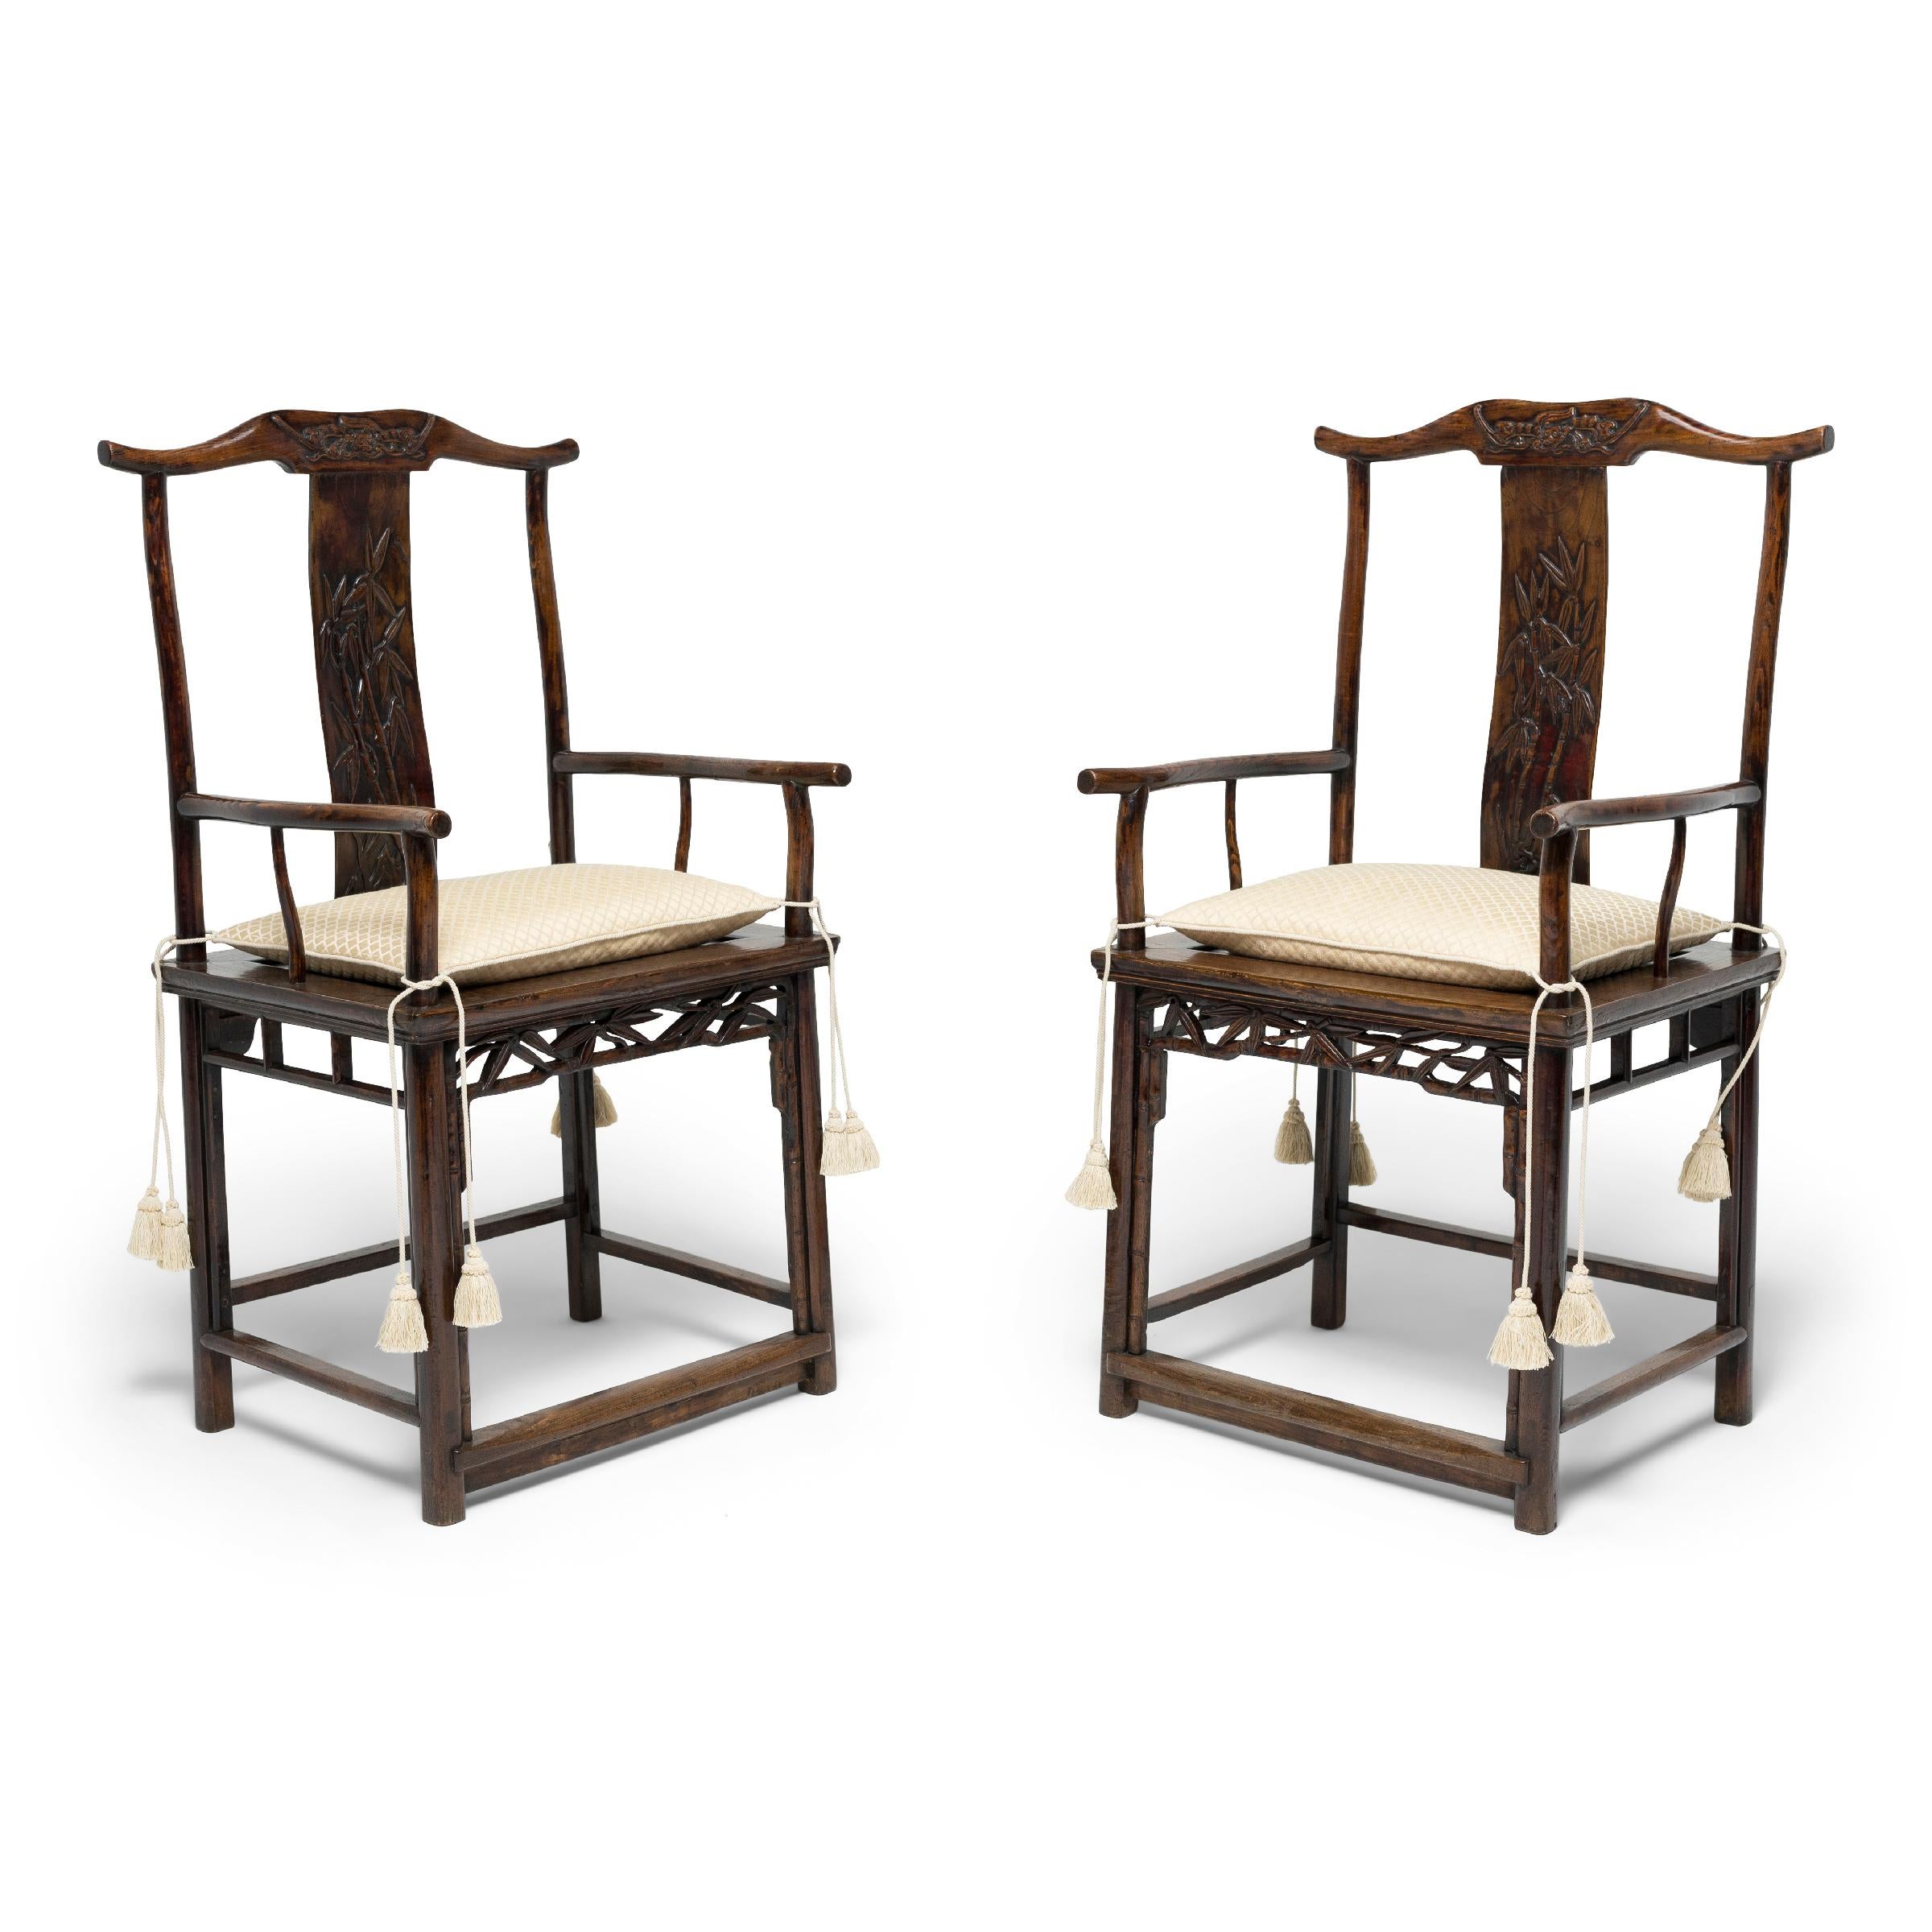 Chinese Pair of Fine Yoke Back Armchairs with Bamboo Carvings, circa 1800 For Sale 4